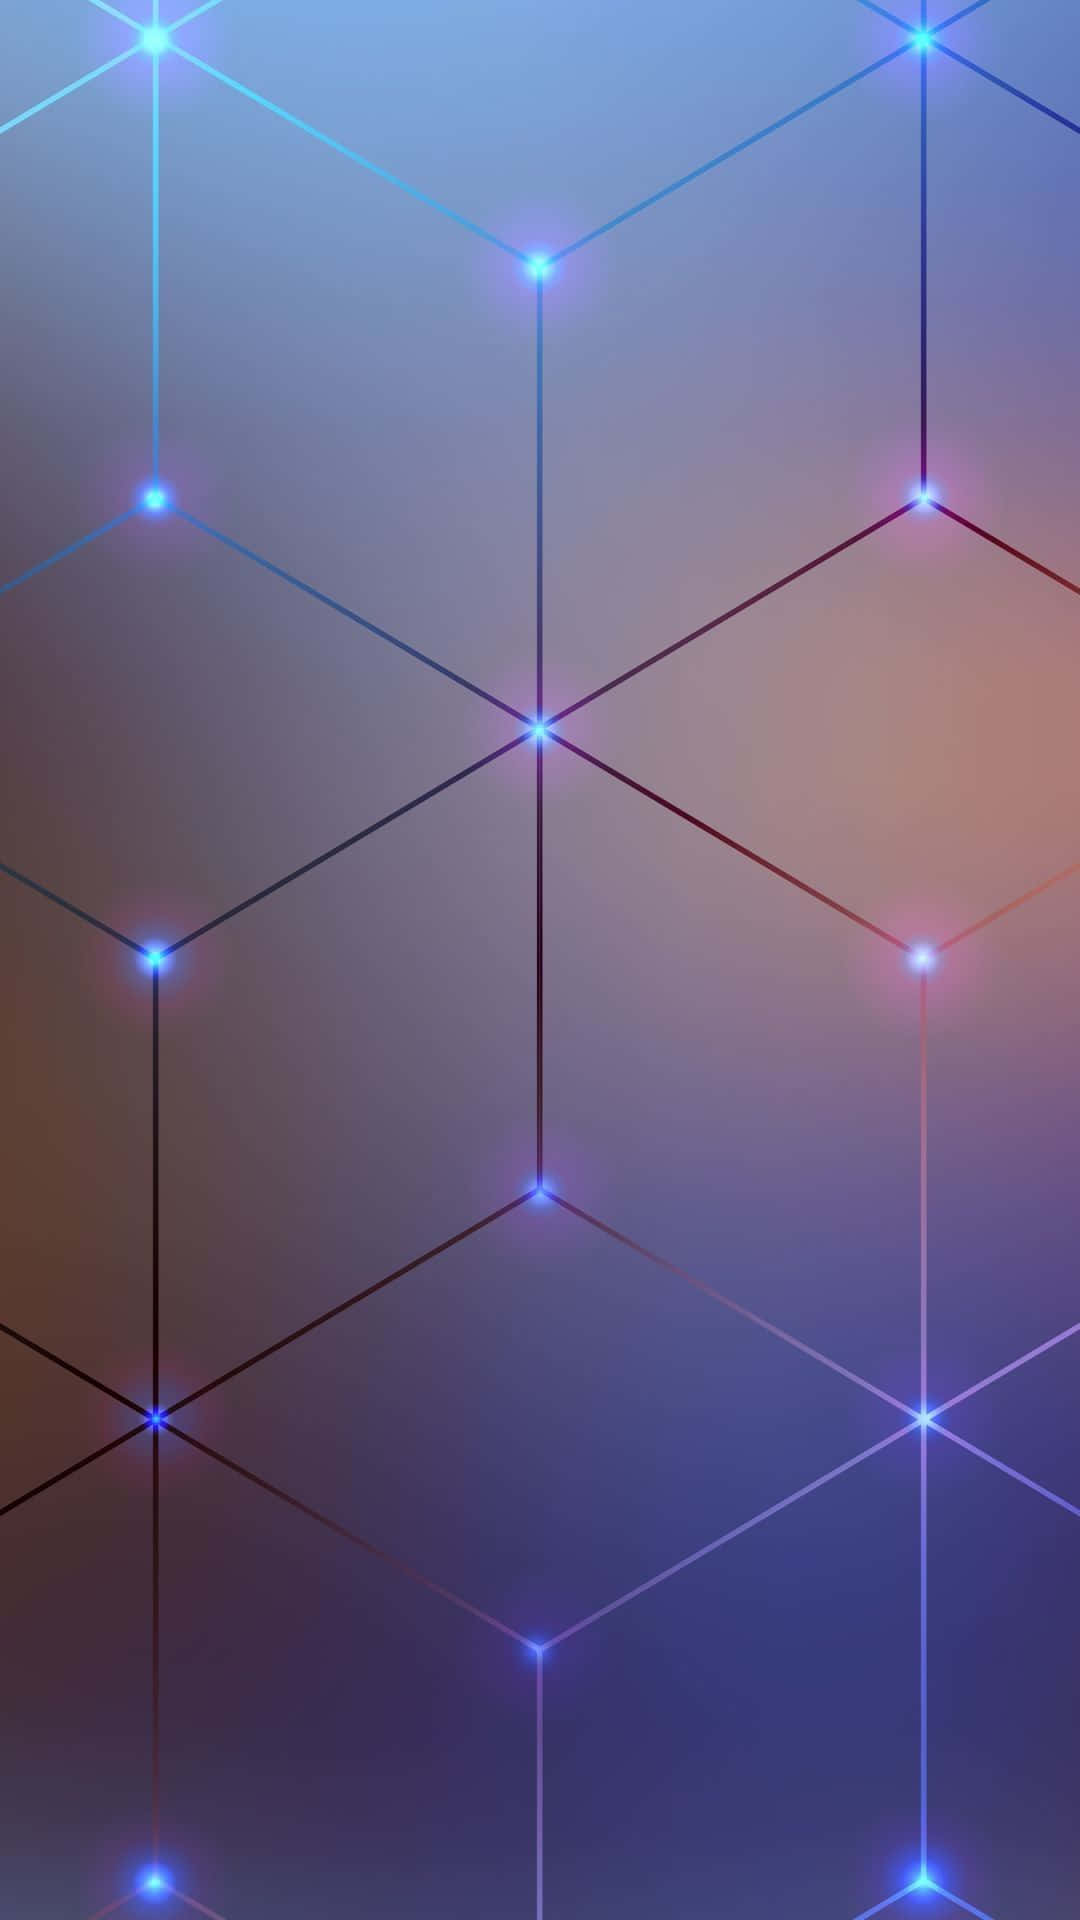 Keep up with the latest trends with this Geometric Iphone Wallpaper